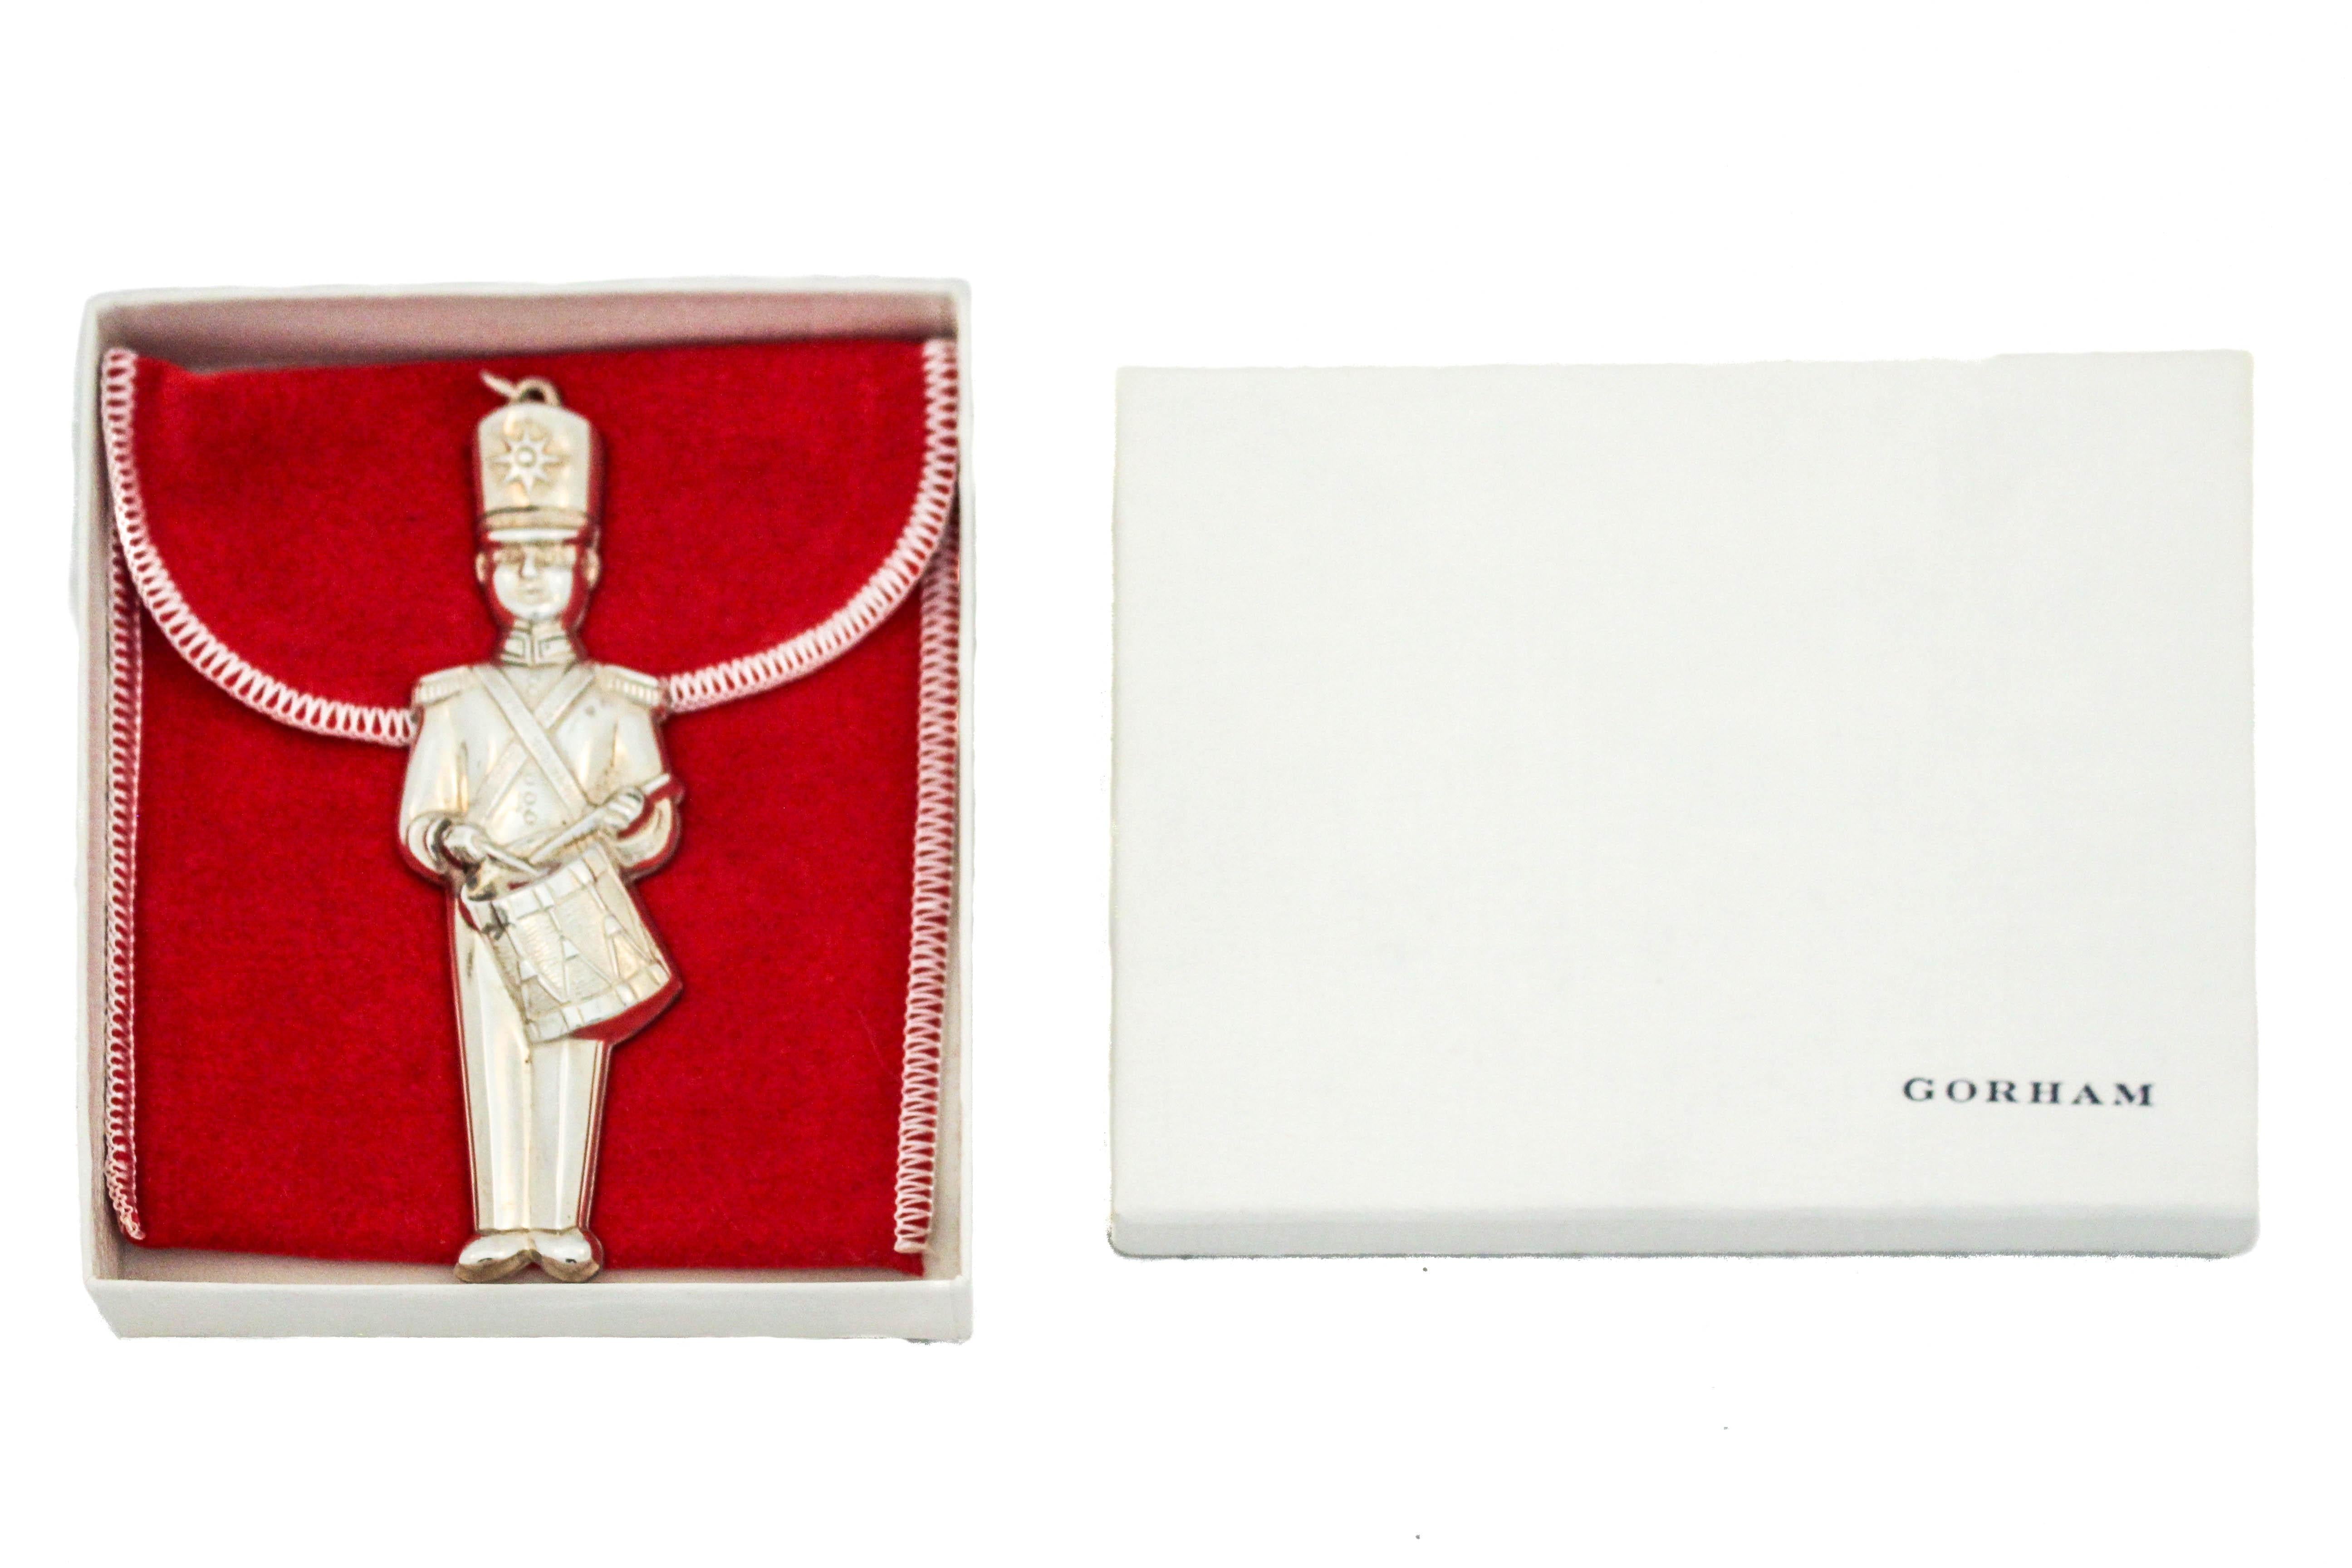 Being offered is a sterling silver Christmas ornament made by Gorham Silversmiths of Providence, Rhode Island, circa 1980.  It is of a toy solider playing the drums.  Nutcracker dolls, also known as Christmas nutcrackers are decorative nutcracker